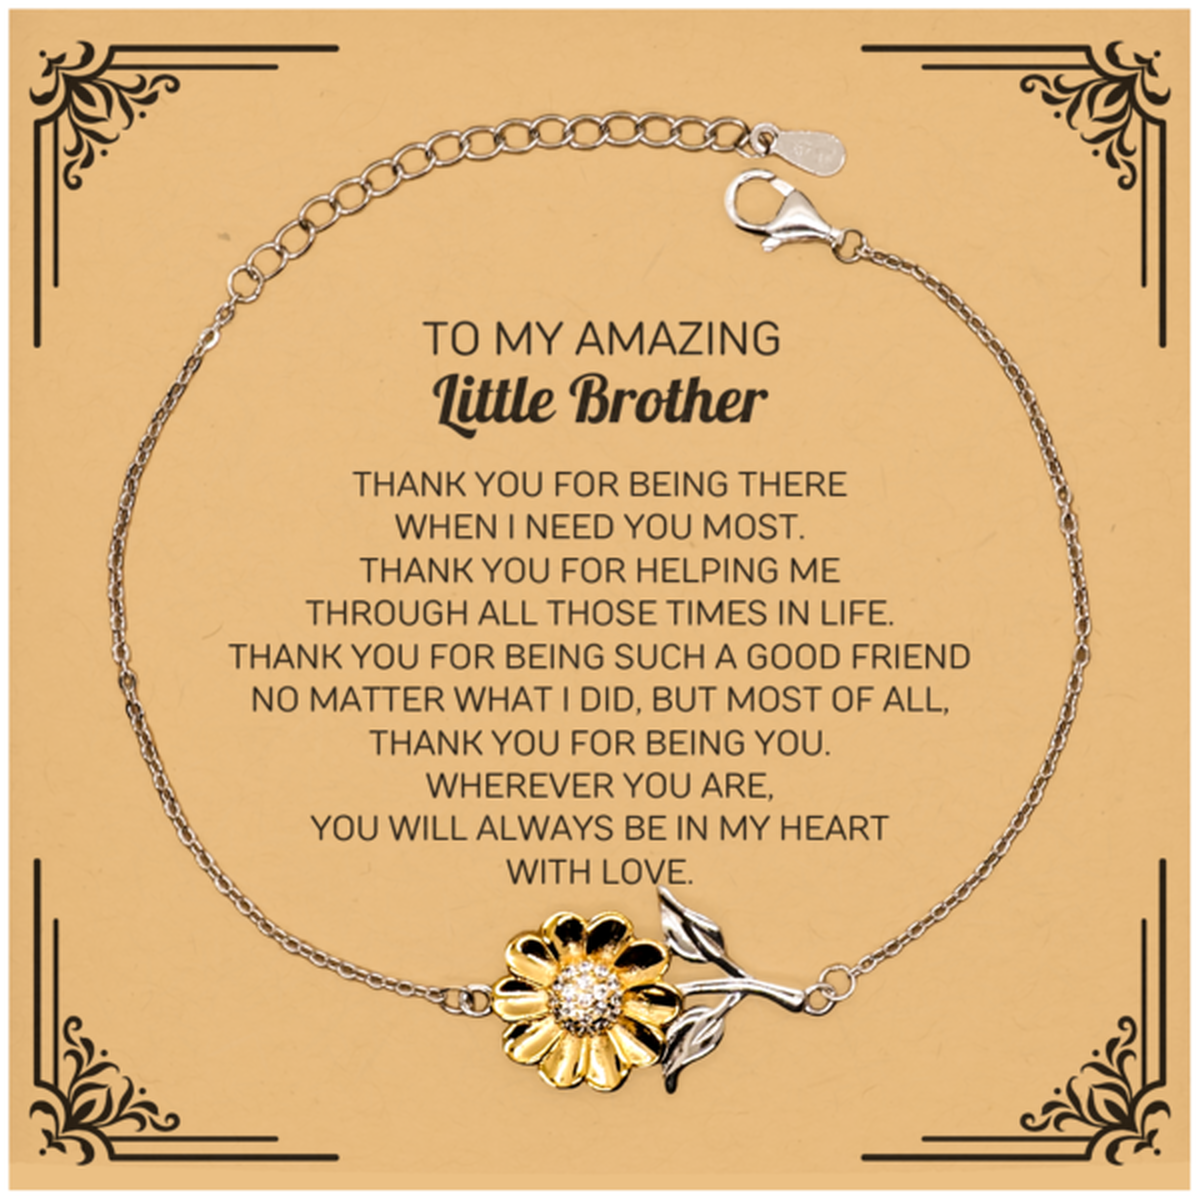 To My Amazing Little Brother Sunflower Bracelet, Thank you for being there, Thank You Gifts For Little Brother, Birthday, Christmas Unique Gifts For Little Brother